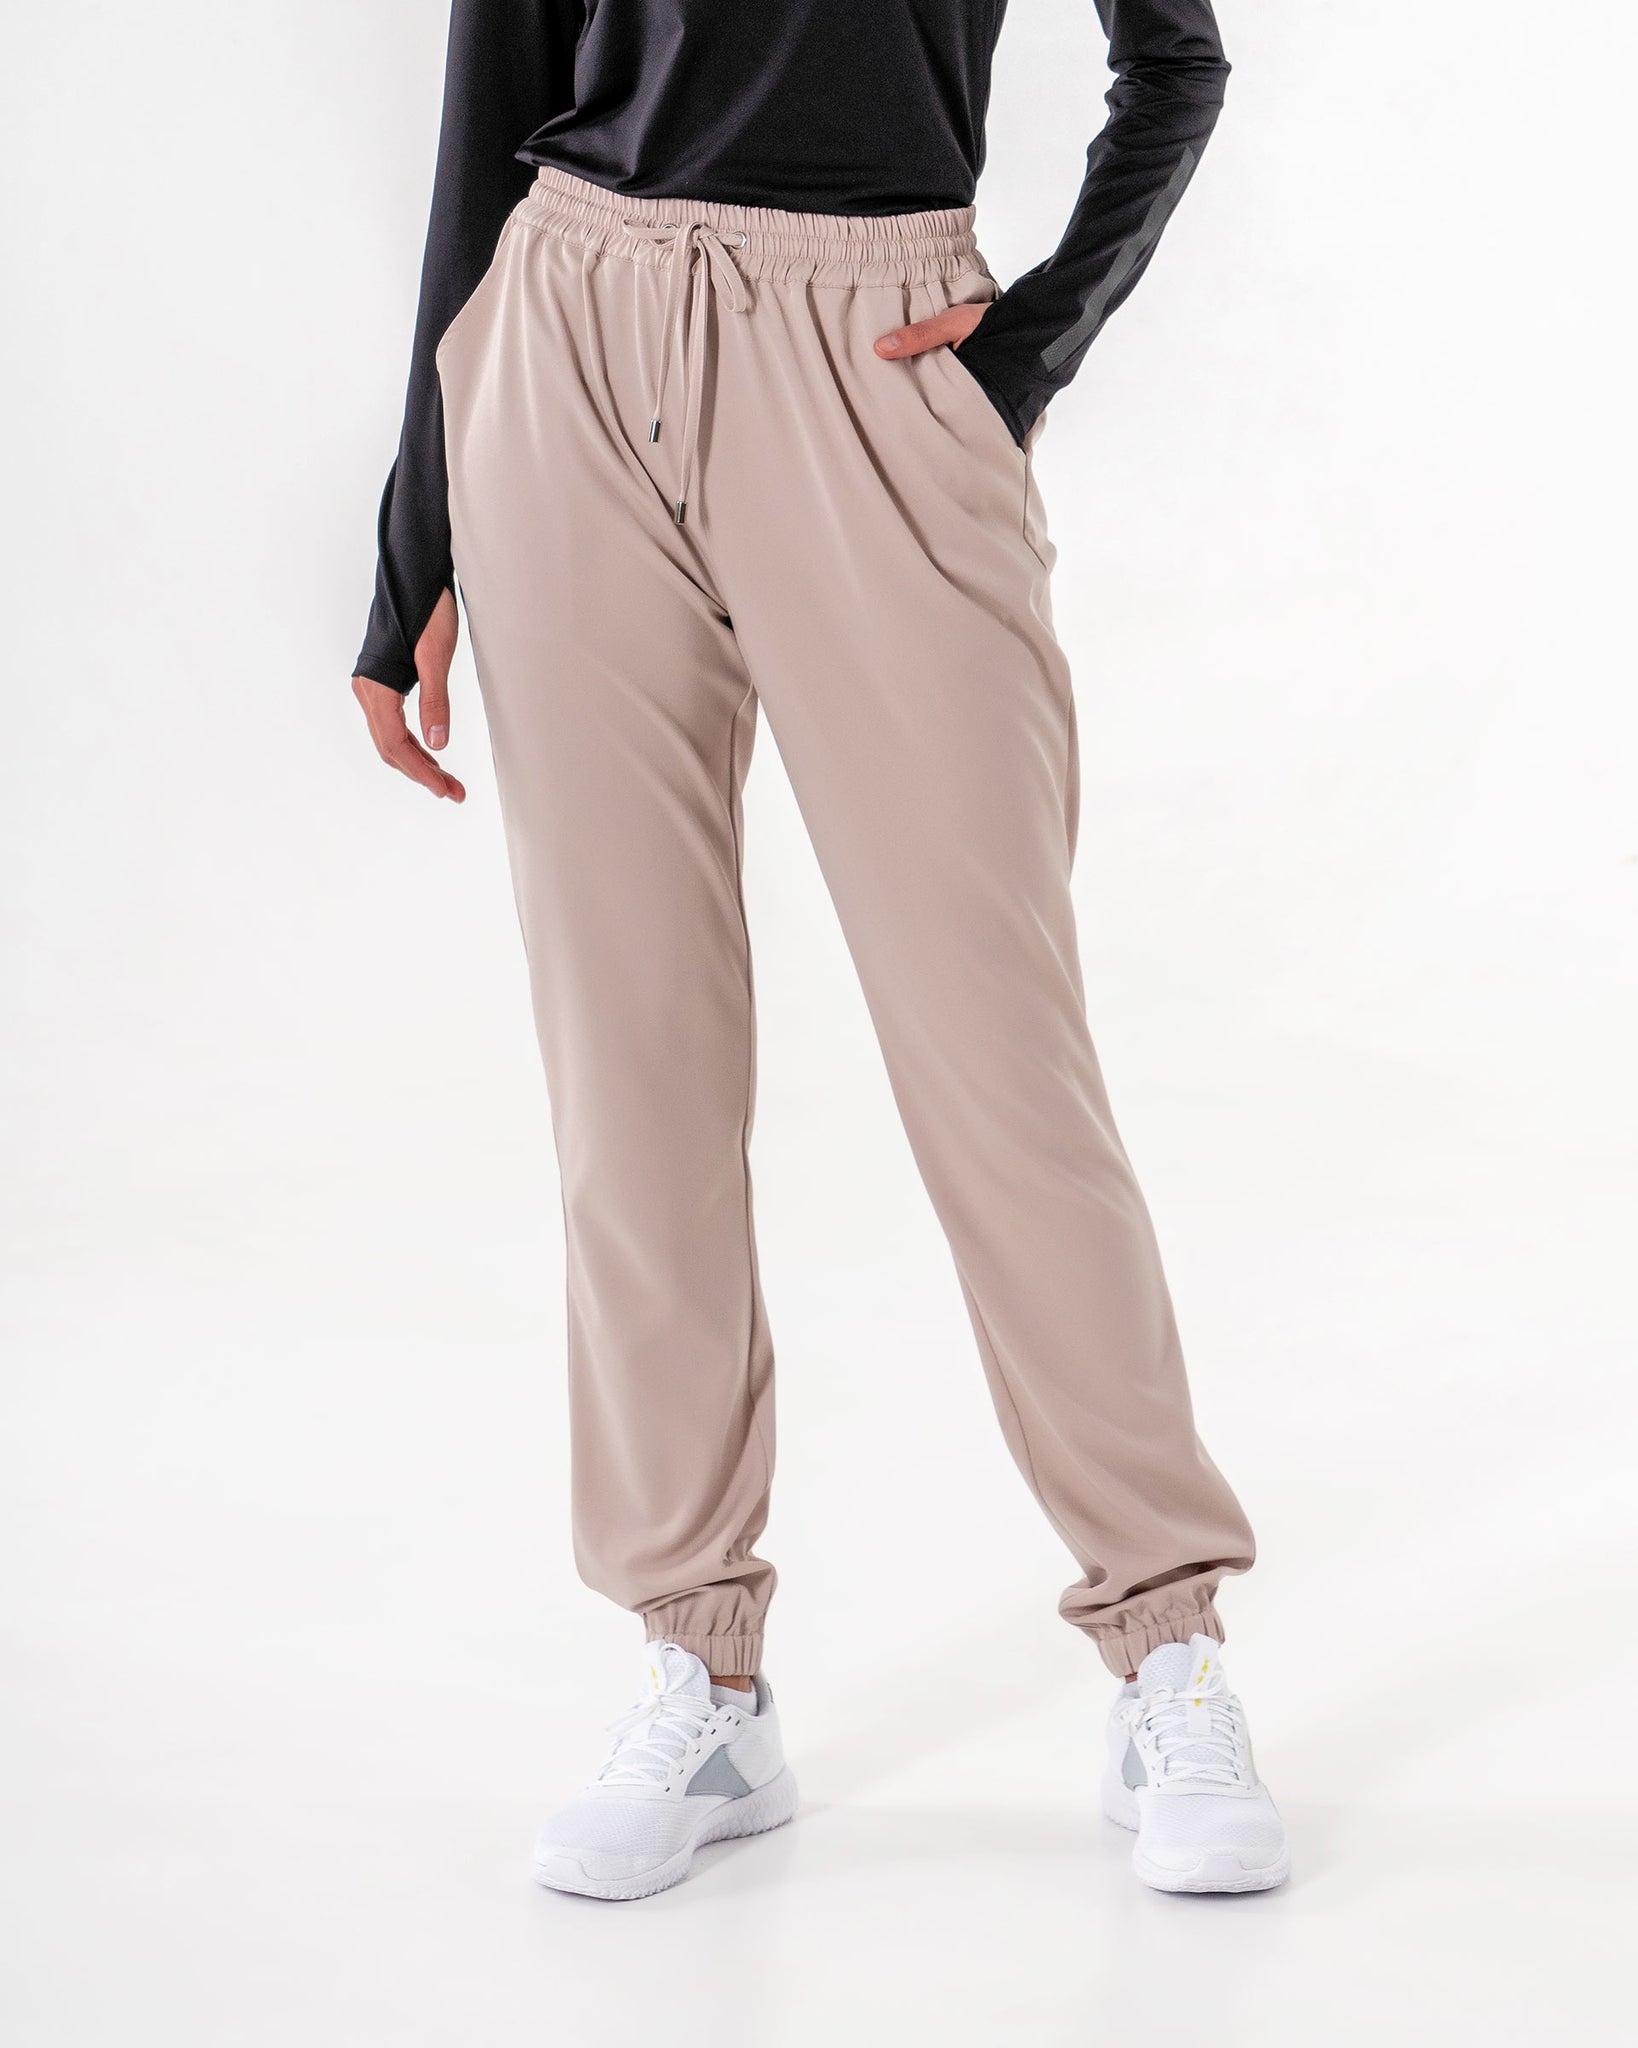 Glider Drawstring Jogger - Shop Modest Activewear and Apparel